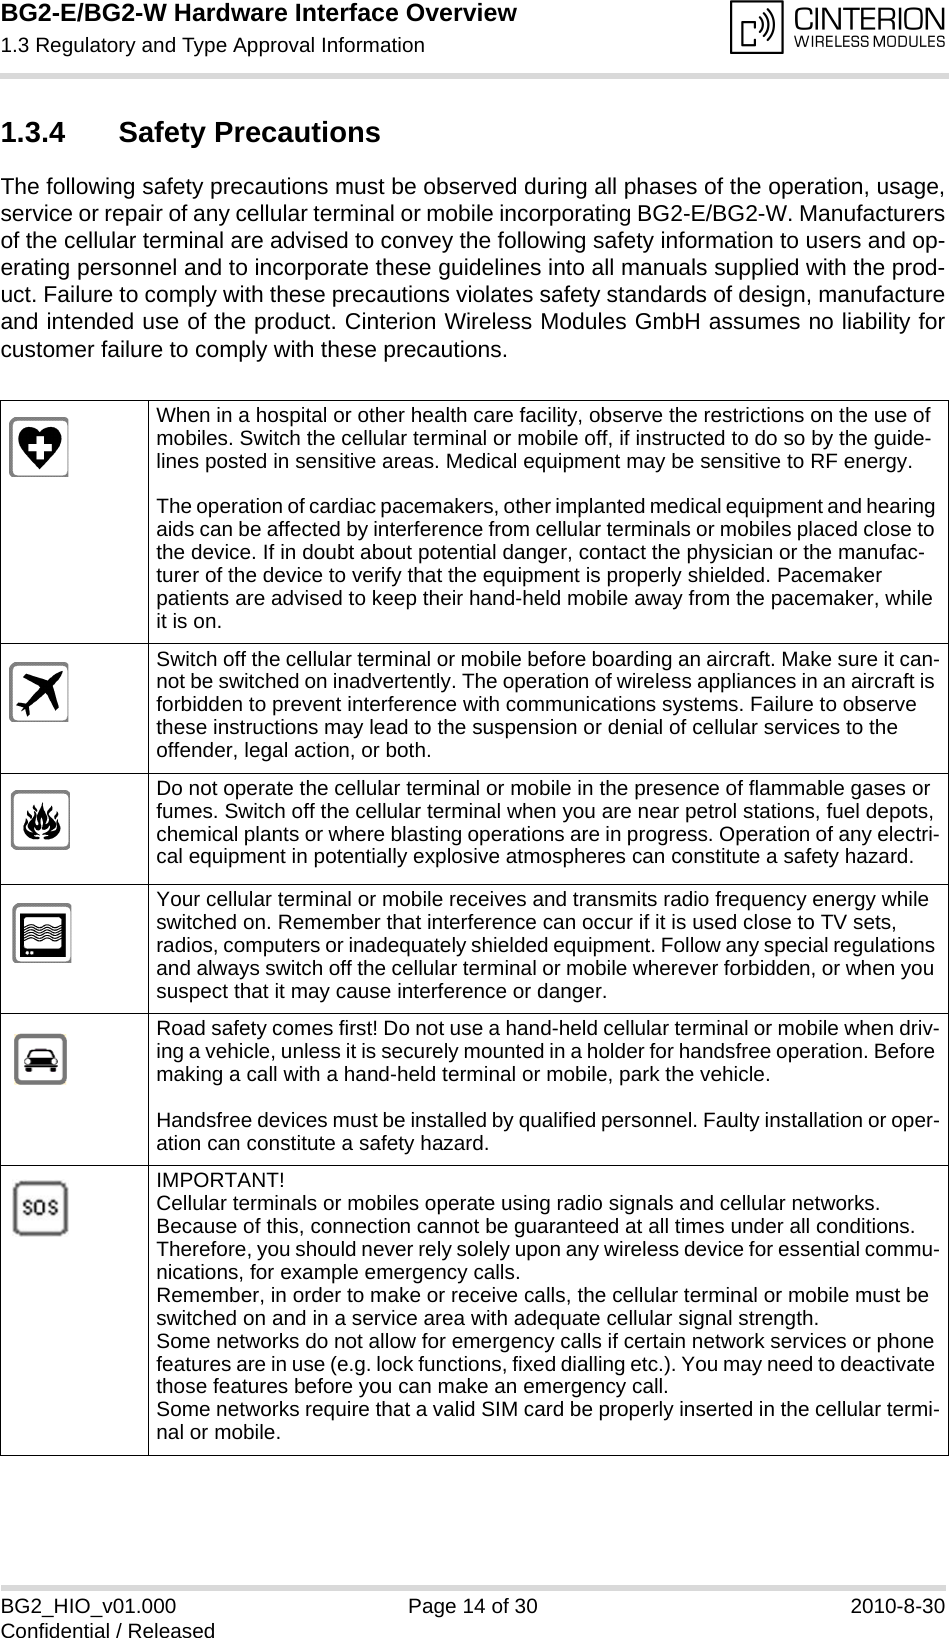 BG2-E/BG2-W Hardware Interface Overview1.3 Regulatory and Type Approval Information14BG2_HIO_v01.000 Page 14 of 30 2010-8-30Confidential / Released1.3.4 Safety PrecautionsThe following safety precautions must be observed during all phases of the operation, usage,service or repair of any cellular terminal or mobile incorporating BG2-E/BG2-W. Manufacturersof the cellular terminal are advised to convey the following safety information to users and op-erating personnel and to incorporate these guidelines into all manuals supplied with the prod-uct. Failure to comply with these precautions violates safety standards of design, manufactureand intended use of the product. Cinterion Wireless Modules GmbH assumes no liability forcustomer failure to comply with these precautions.When in a hospital or other health care facility, observe the restrictions on the use of mobiles. Switch the cellular terminal or mobile off, if instructed to do so by the guide-lines posted in sensitive areas. Medical equipment may be sensitive to RF energy. The operation of cardiac pacemakers, other implanted medical equipment and hearing aids can be affected by interference from cellular terminals or mobiles placed close to the device. If in doubt about potential danger, contact the physician or the manufac-turer of the device to verify that the equipment is properly shielded. Pacemaker patients are advised to keep their hand-held mobile away from the pacemaker, while it is on. Switch off the cellular terminal or mobile before boarding an aircraft. Make sure it can-not be switched on inadvertently. The operation of wireless appliances in an aircraft is forbidden to prevent interference with communications systems. Failure to observe these instructions may lead to the suspension or denial of cellular services to the offender, legal action, or both.Do not operate the cellular terminal or mobile in the presence of flammable gases or fumes. Switch off the cellular terminal when you are near petrol stations, fuel depots, chemical plants or where blasting operations are in progress. Operation of any electri-cal equipment in potentially explosive atmospheres can constitute a safety hazard.Your cellular terminal or mobile receives and transmits radio frequency energy while switched on. Remember that interference can occur if it is used close to TV sets, radios, computers or inadequately shielded equipment. Follow any special regulations and always switch off the cellular terminal or mobile wherever forbidden, or when you suspect that it may cause interference or danger.Road safety comes first! Do not use a hand-held cellular terminal or mobile when driv-ing a vehicle, unless it is securely mounted in a holder for handsfree operation. Before making a call with a hand-held terminal or mobile, park the vehicle. Handsfree devices must be installed by qualified personnel. Faulty installation or oper-ation can constitute a safety hazard.IMPORTANT!Cellular terminals or mobiles operate using radio signals and cellular networks. Because of this, connection cannot be guaranteed at all times under all conditions. Therefore, you should never rely solely upon any wireless device for essential commu-nications, for example emergency calls. Remember, in order to make or receive calls, the cellular terminal or mobile must be switched on and in a service area with adequate cellular signal strength. Some networks do not allow for emergency calls if certain network services or phone features are in use (e.g. lock functions, fixed dialling etc.). You may need to deactivate those features before you can make an emergency call.Some networks require that a valid SIM card be properly inserted in the cellular termi-nal or mobile. 